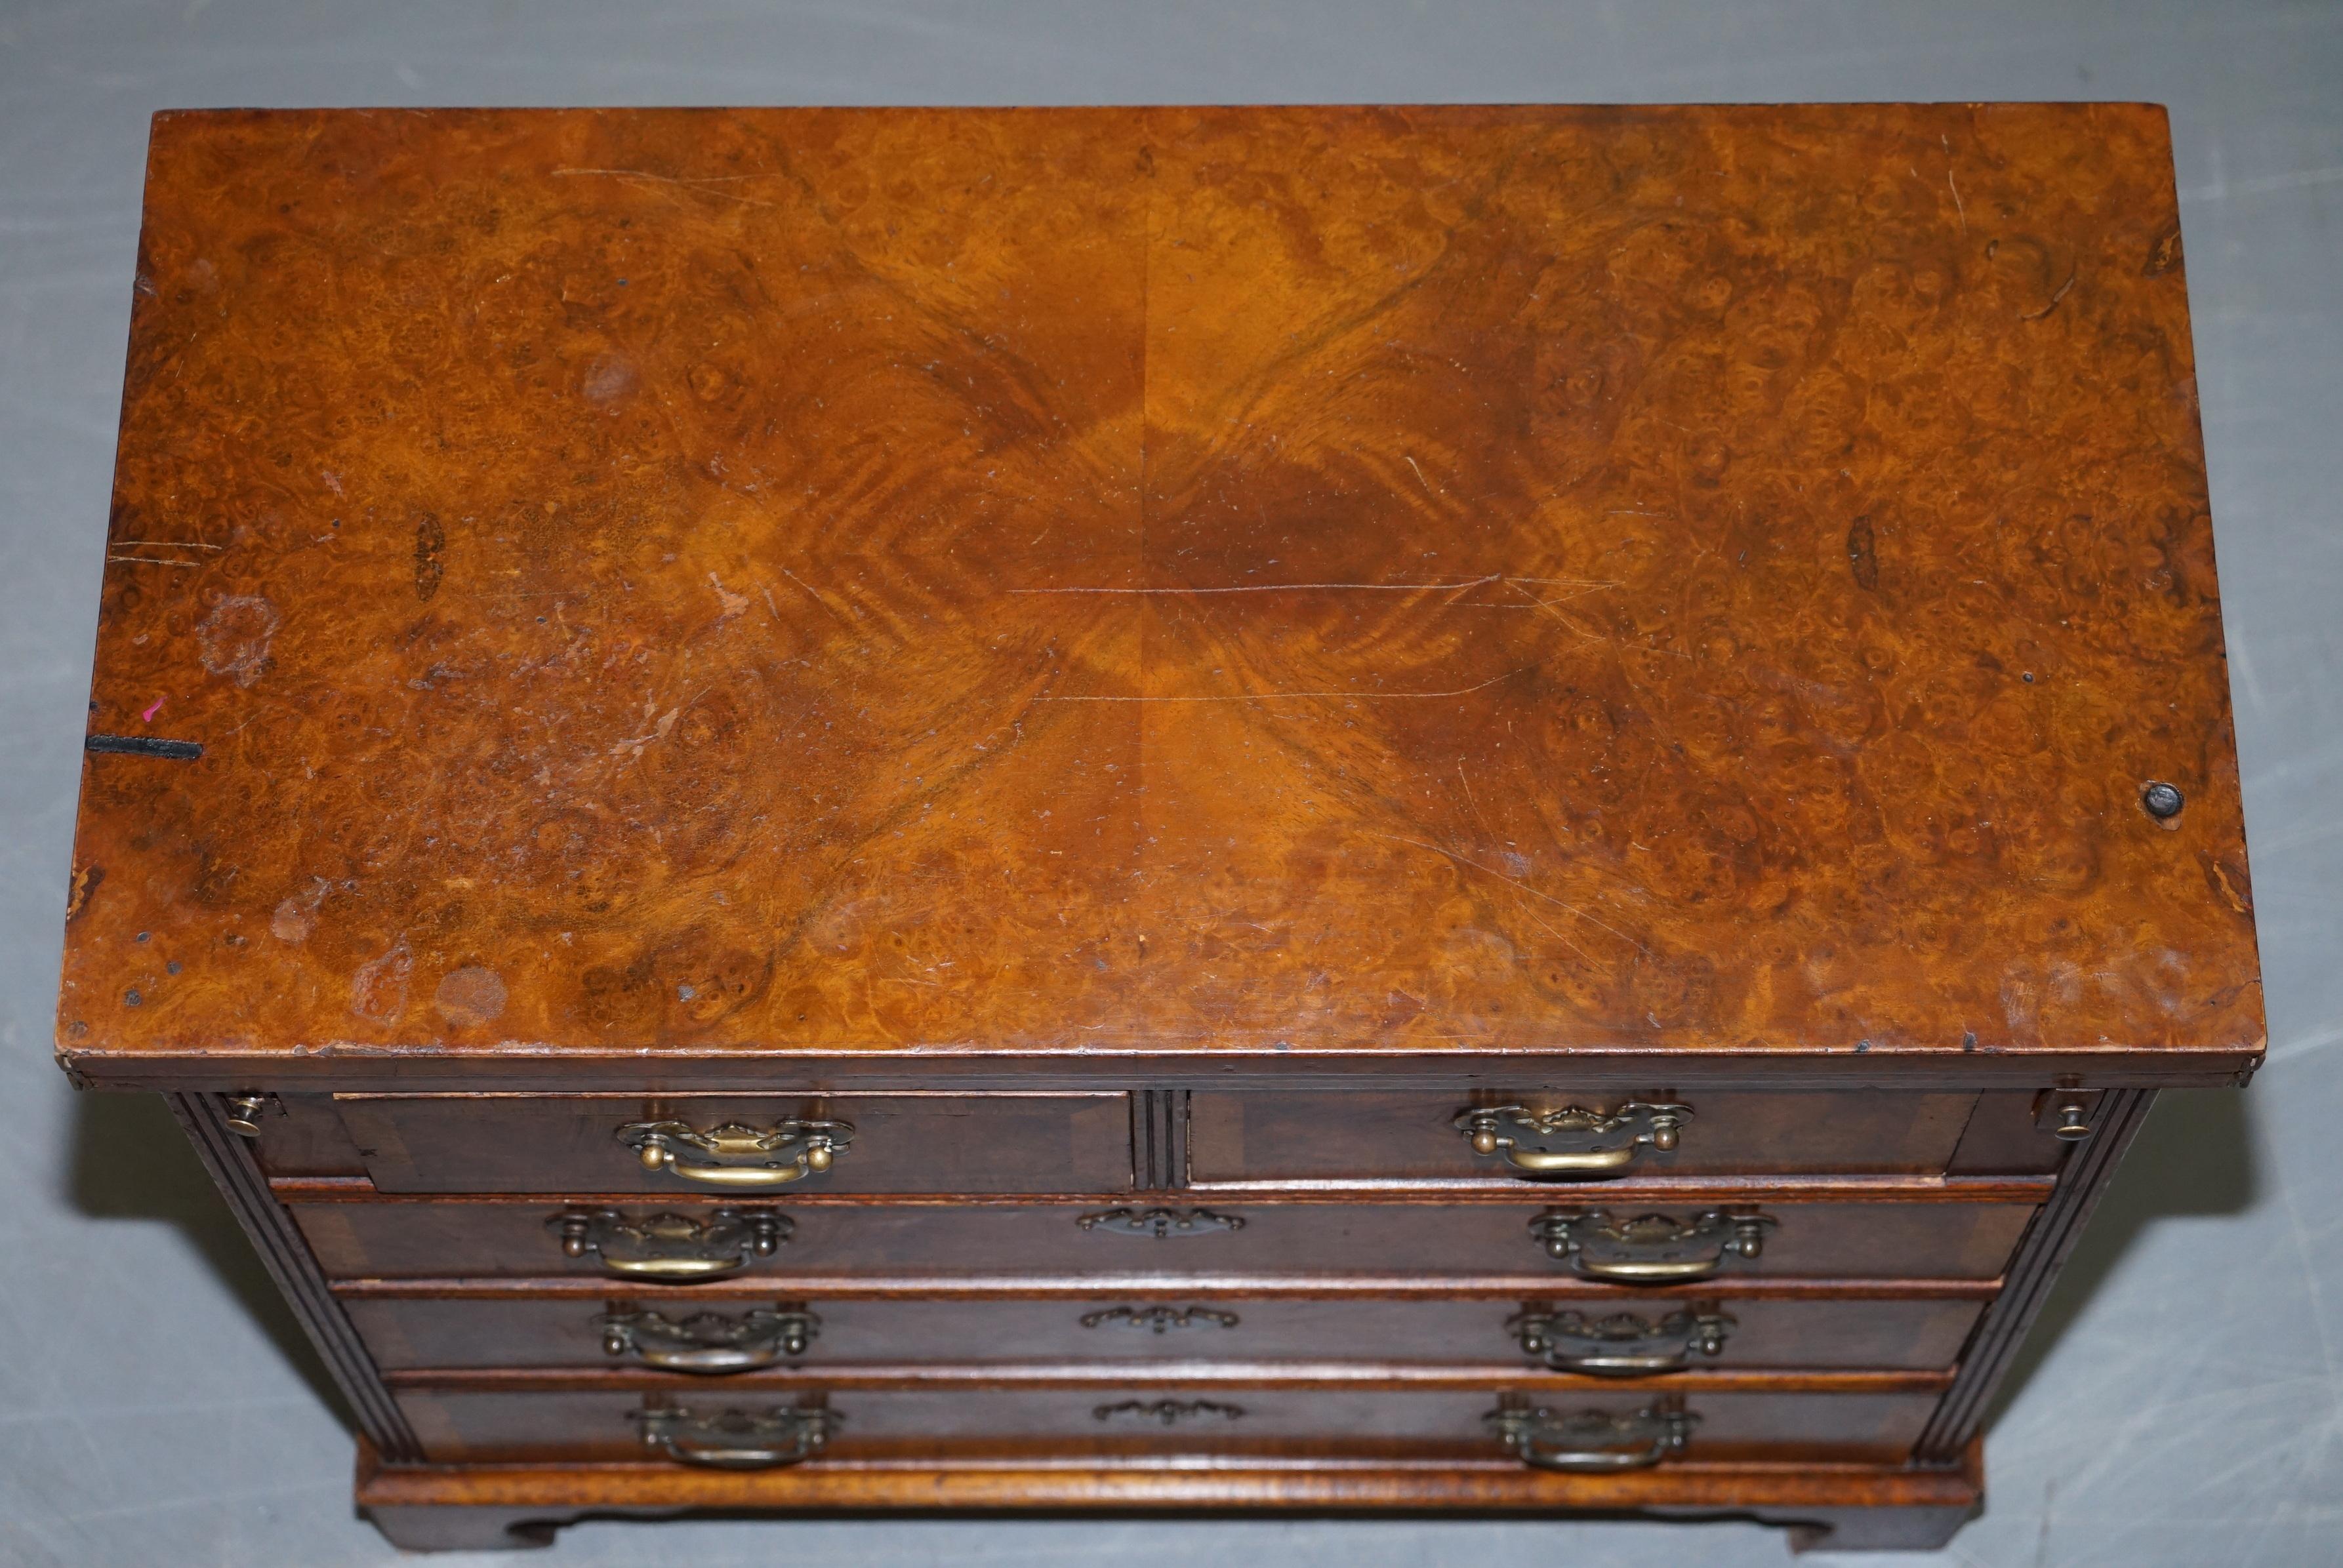 butlers chest of drawers